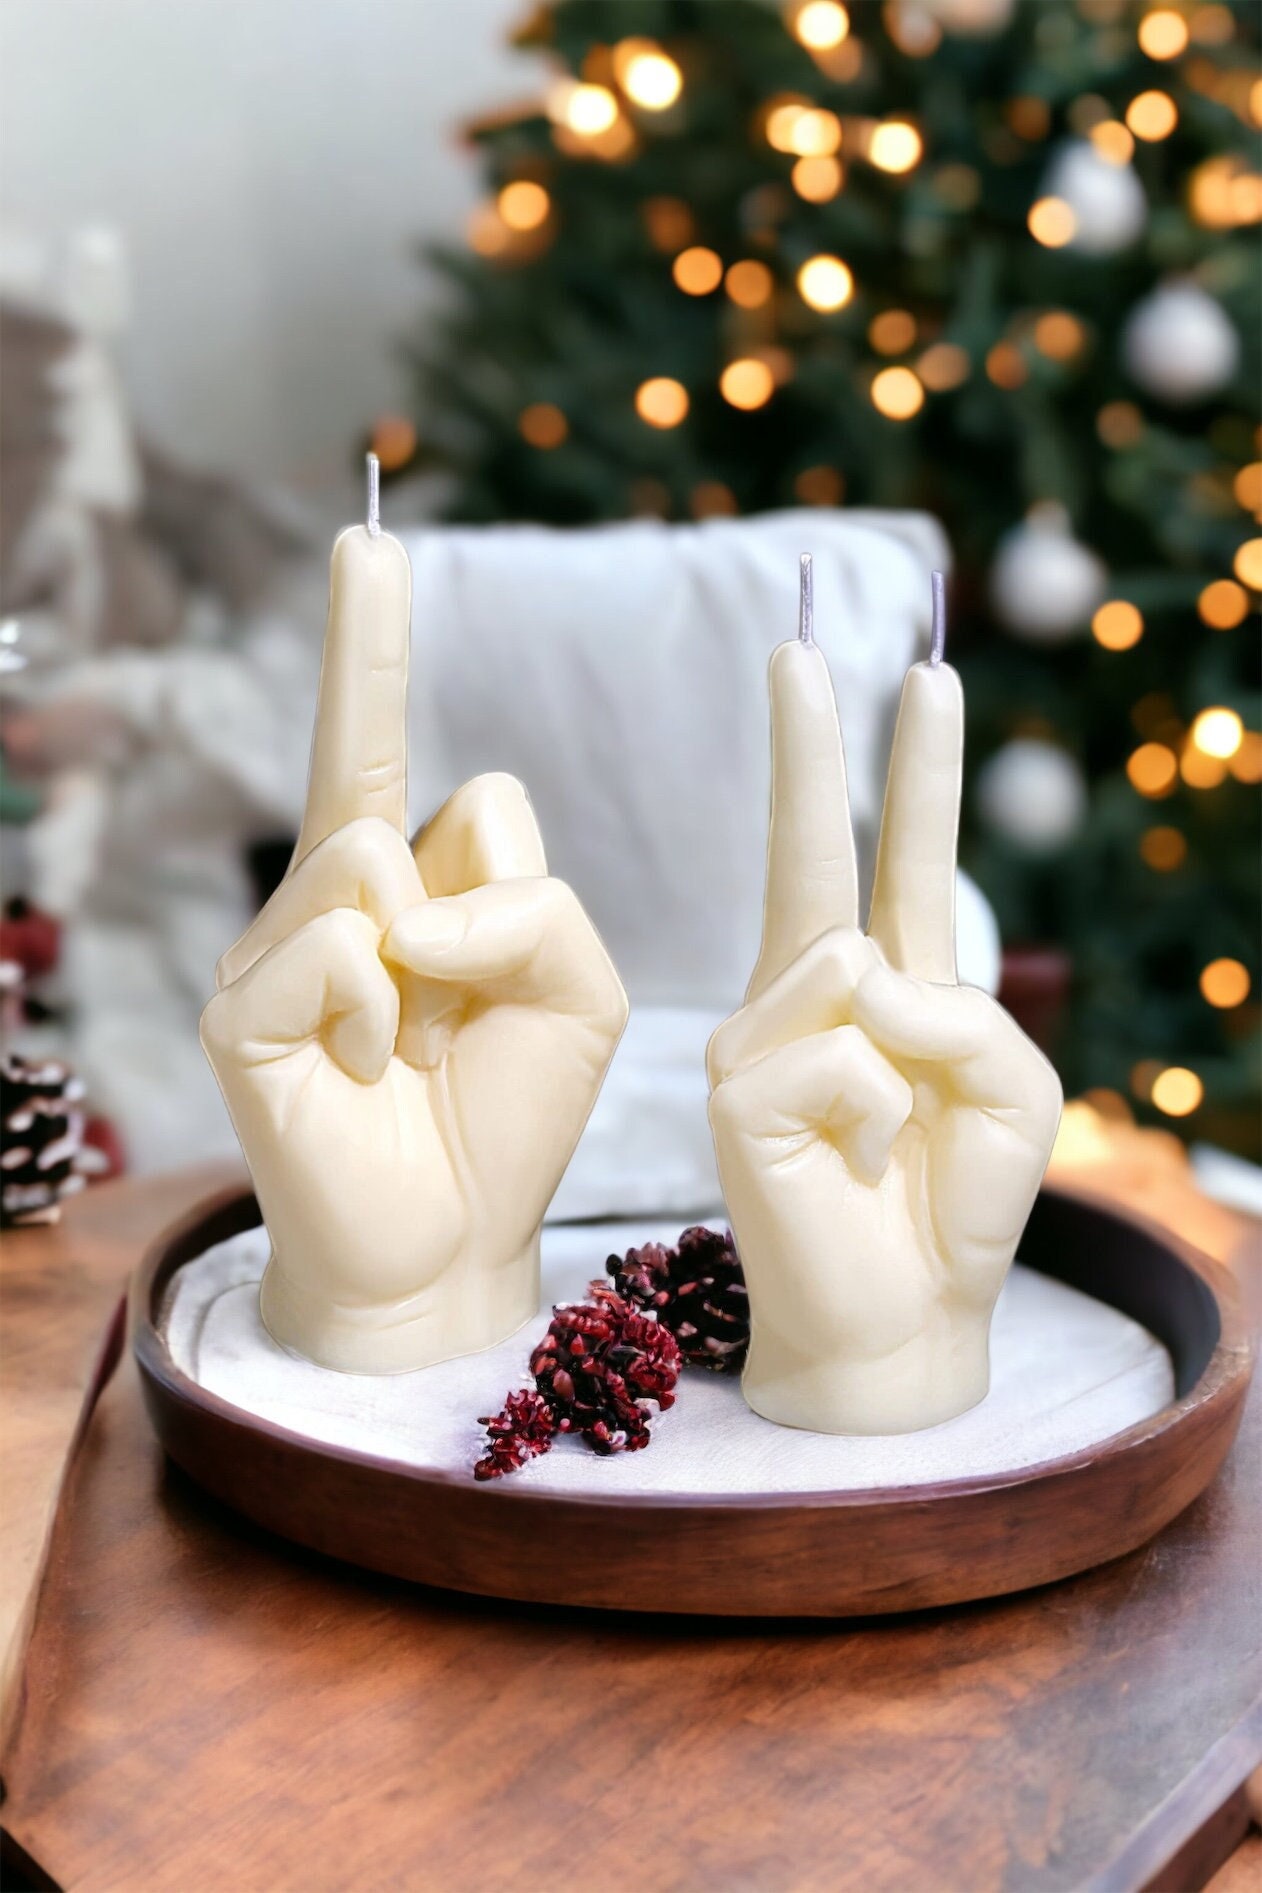 Middle Finger Fuck Candle – CandleLume